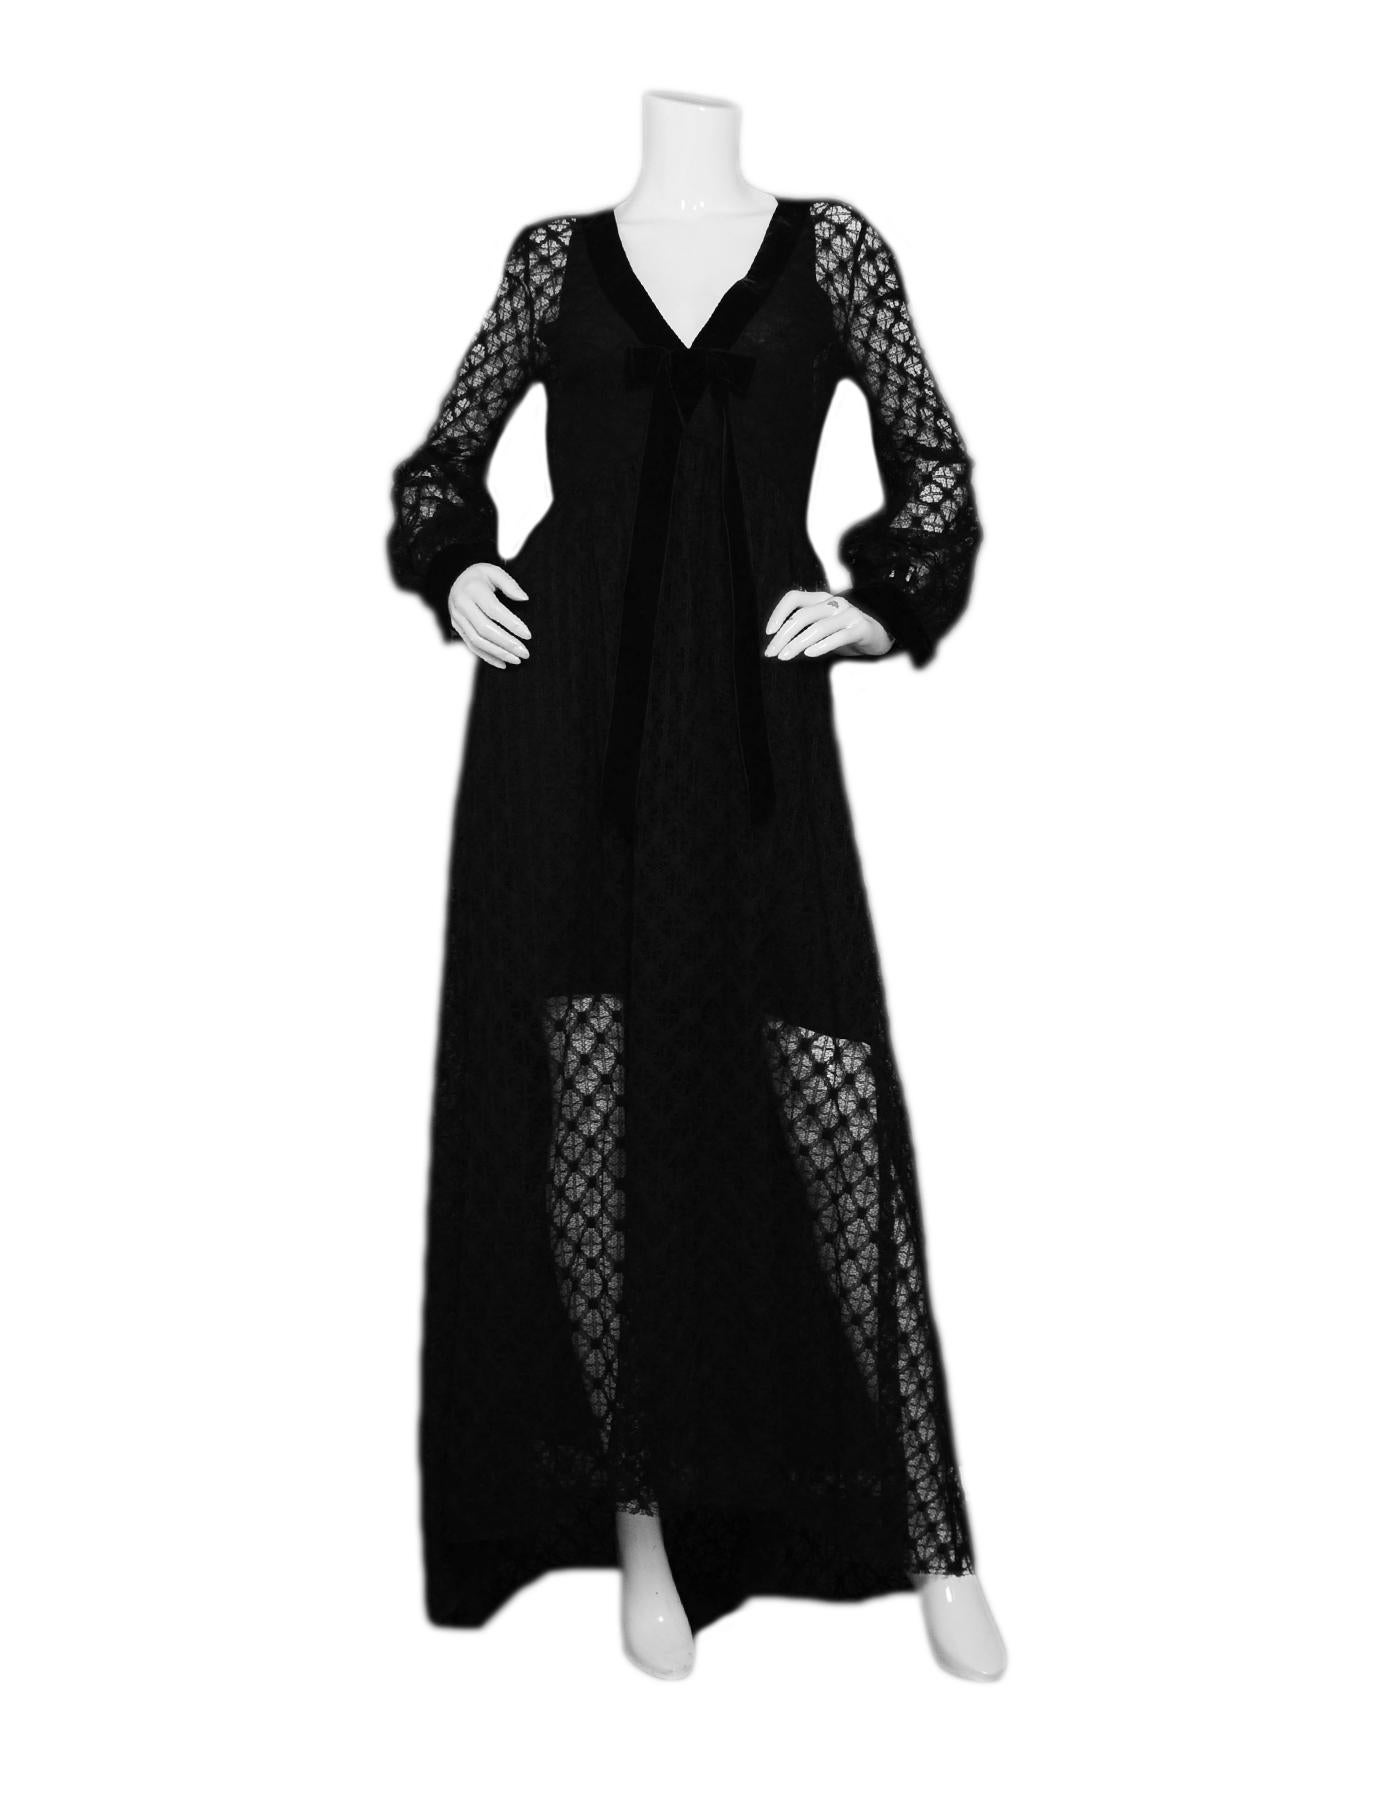 Philosophy NWT Black Long Sleeve Lace Dress w/ V-Neck Velvet Bow sz 8 

Made In: Romania
Color: Black
Materials: 36% cotton, 34% polyamide, 30% viscose. Combo: 100% polyamide
Lining: 100% polyester
Opening/Closure: Side hidden zip
Overall Condition: